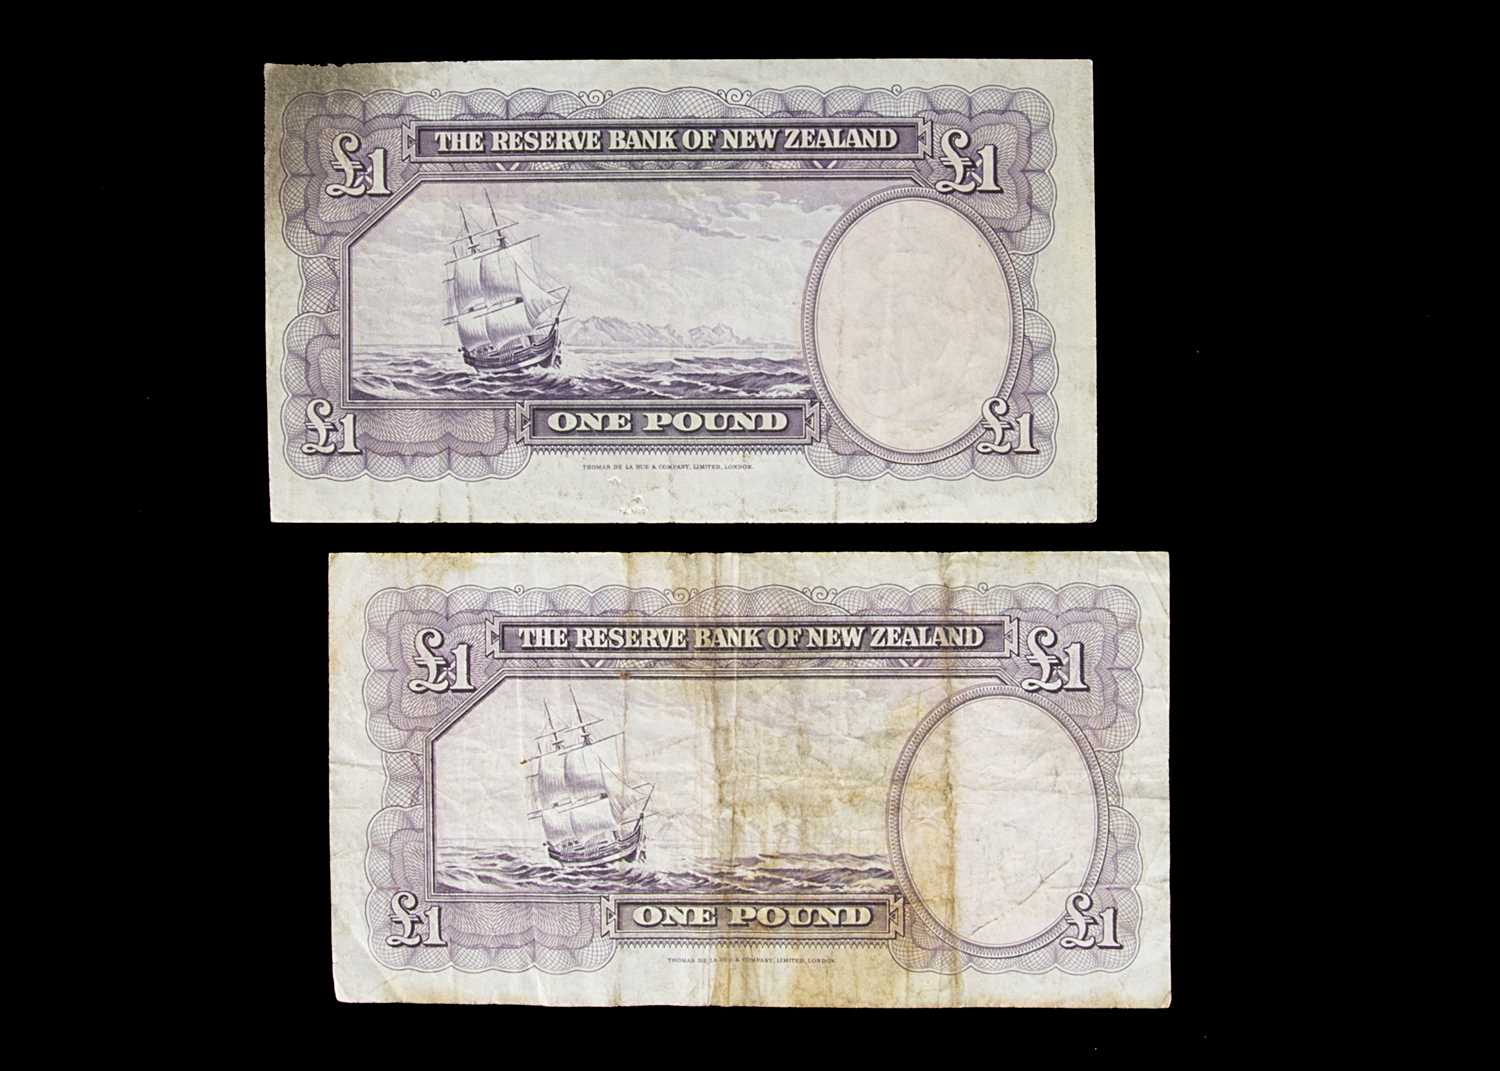 Pair of New Zealand 1 Pound notes, - Image 2 of 2